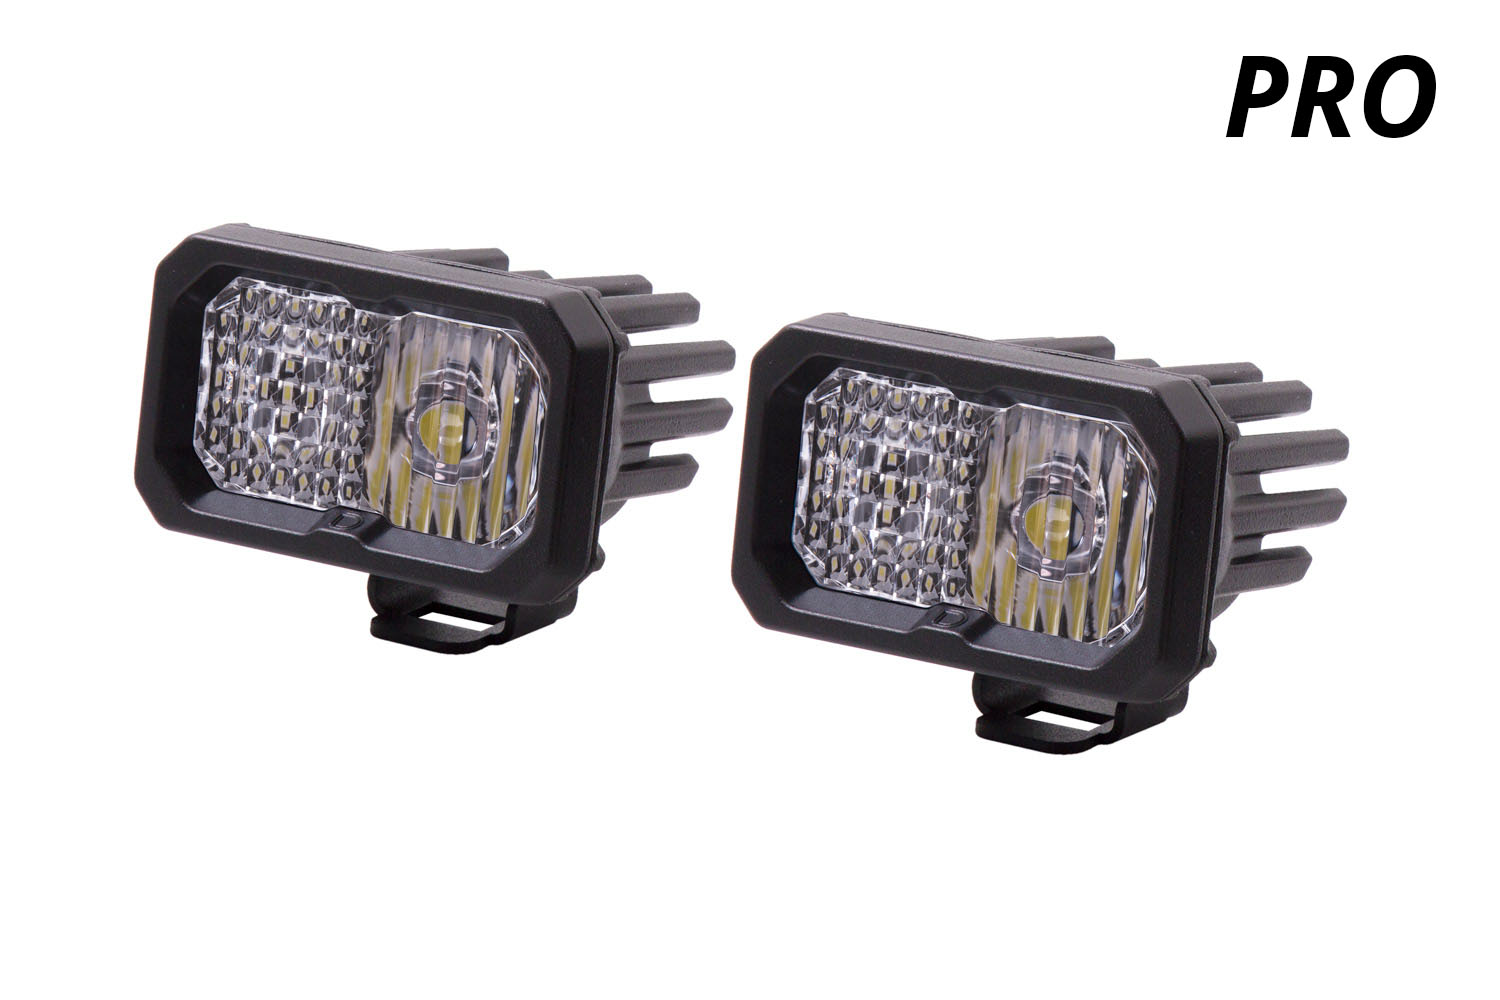 Diode Dynamics Stage Series 2 Inch LED Pod, Pro White Flood Standard BBL Pair